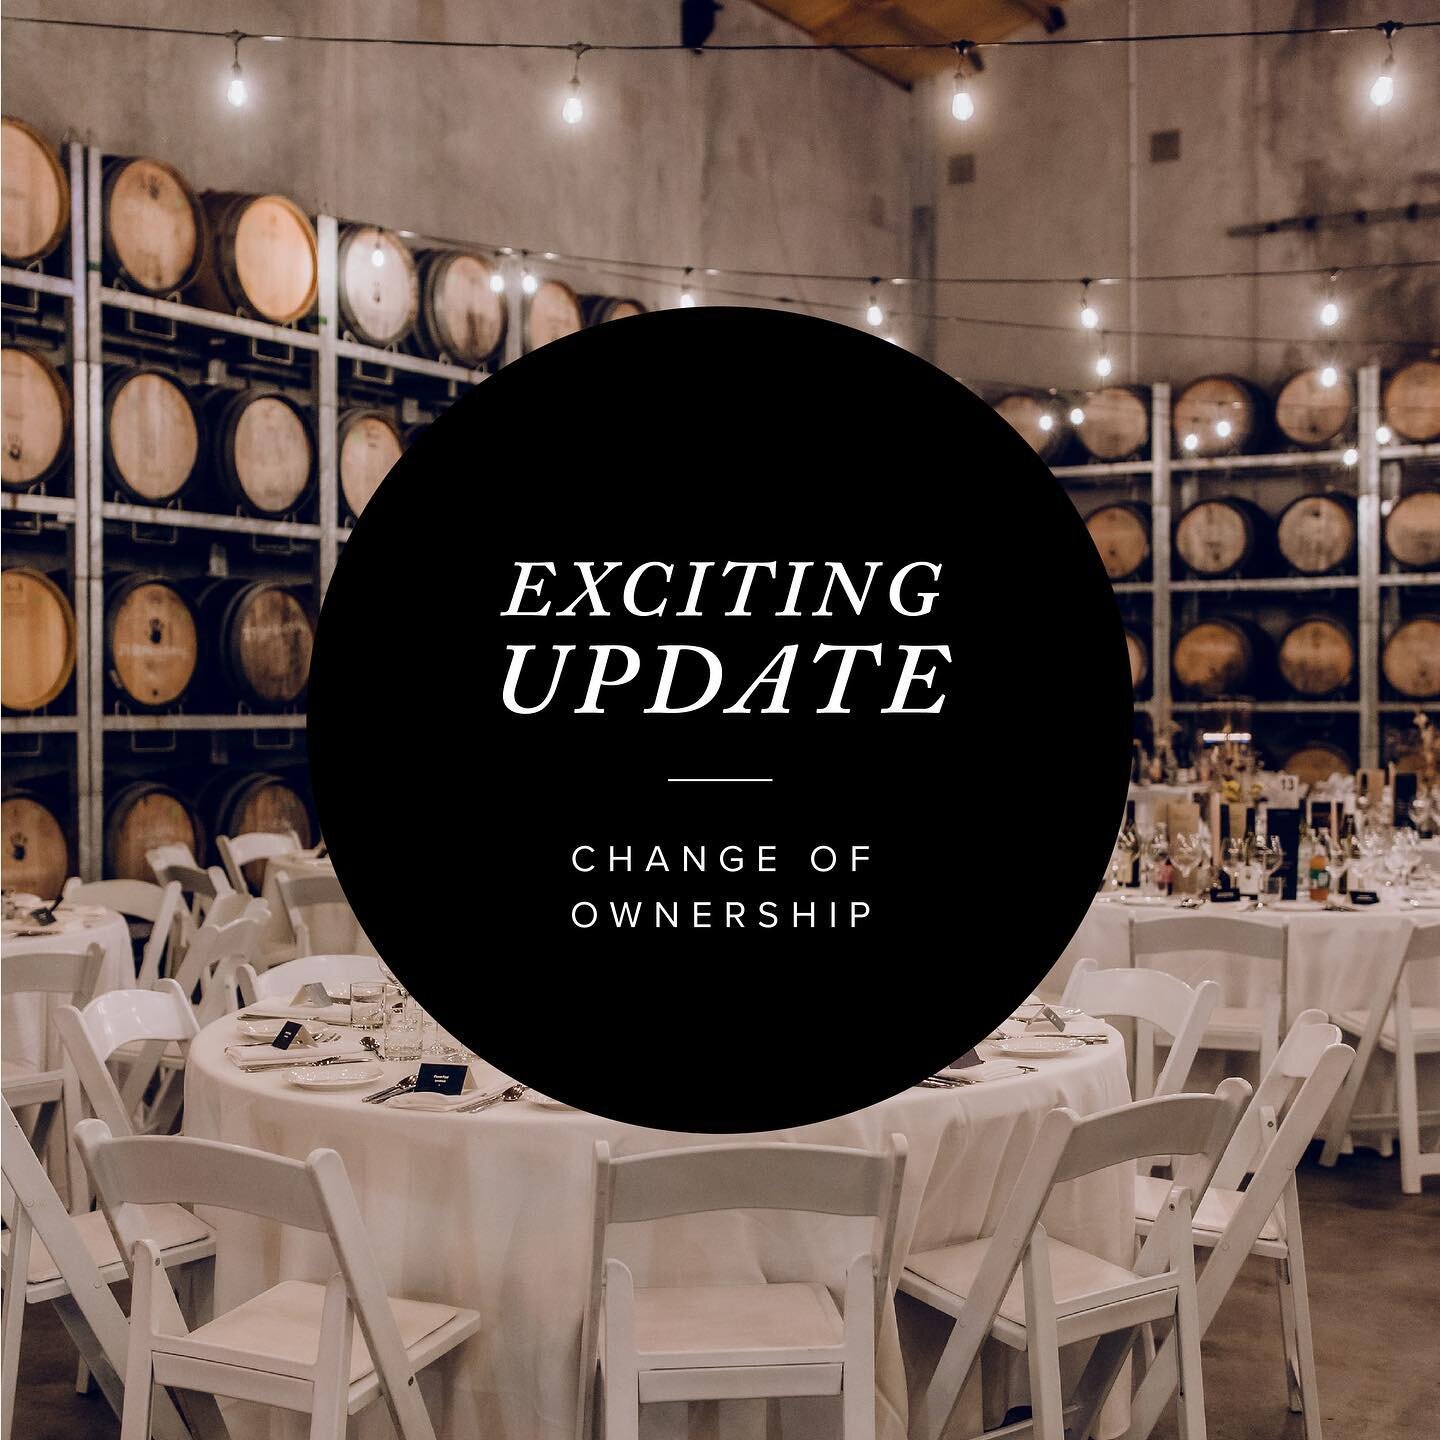 UPDATE &bull; Change of ownership at Got It Covered.⁣
&nbsp;⁣
We are thrilled to share some exciting news with you all. Got It Covered has a new owner, Pete Ydgren!⁣
&nbsp;⁣
Pete comes with a wealth of knowledge and experience in the event industry s